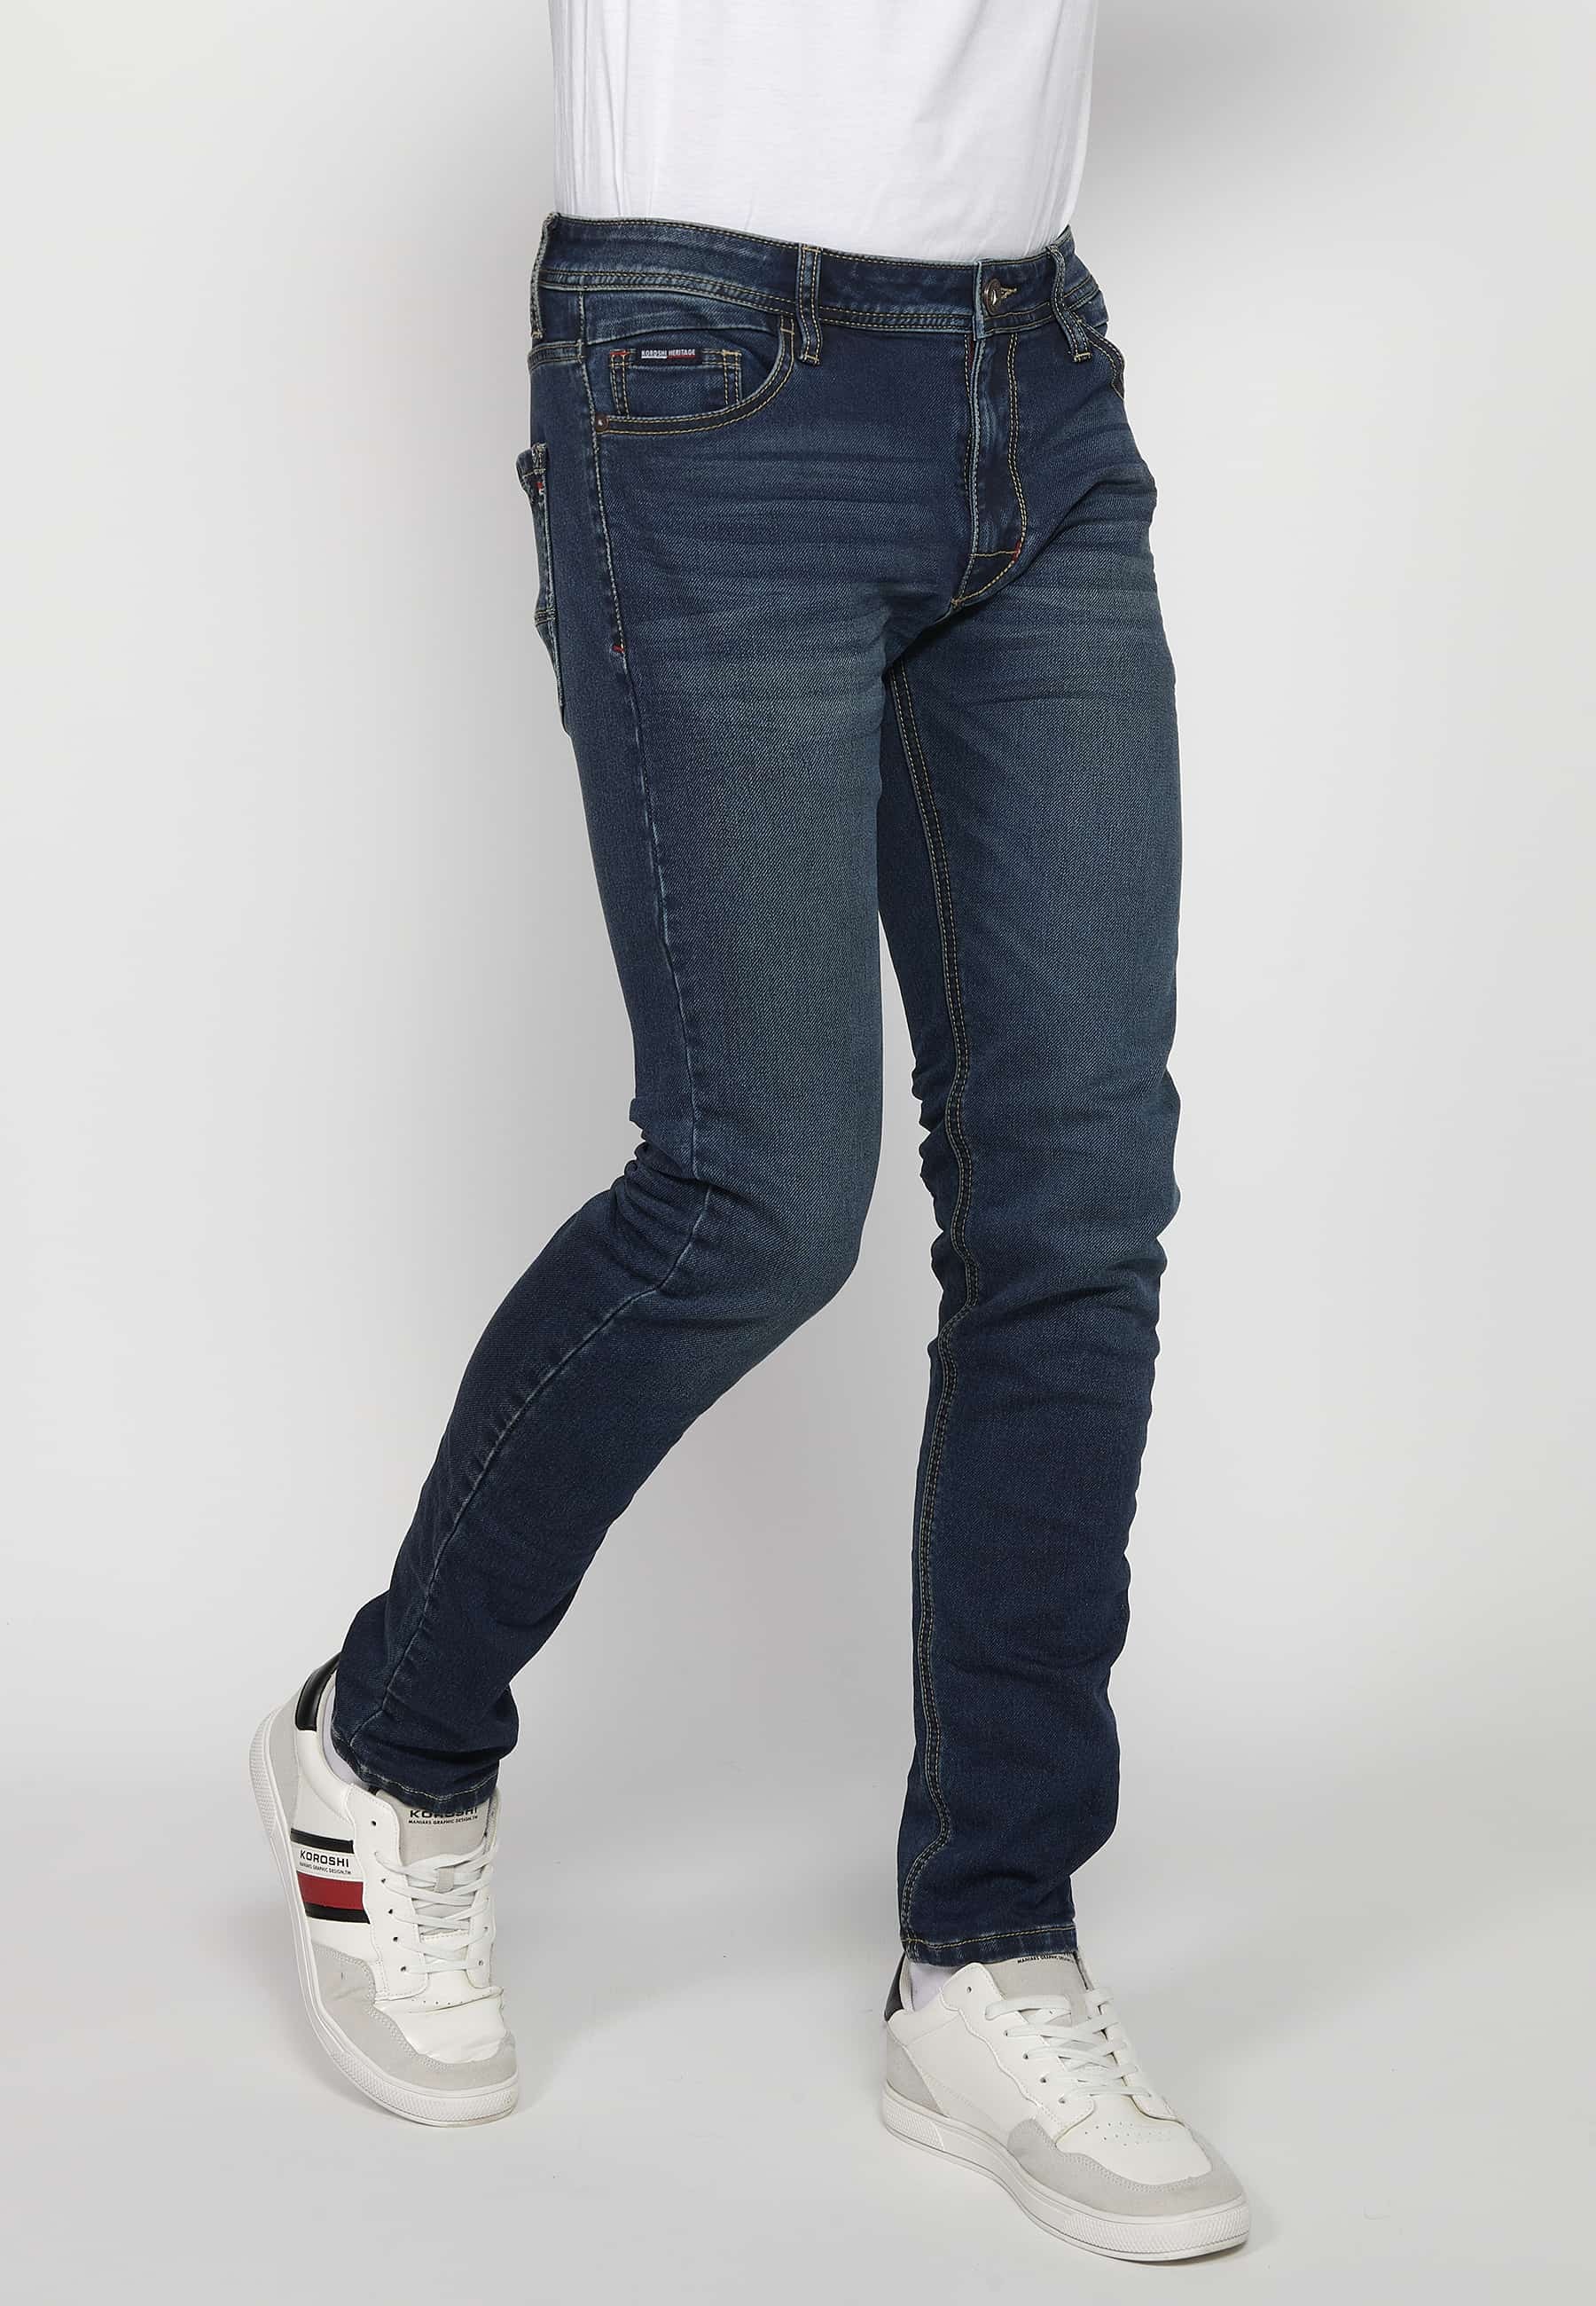 Slim fit long jeans with front zipper and button closure with five pockets, one blue pocket pocket for Men 3